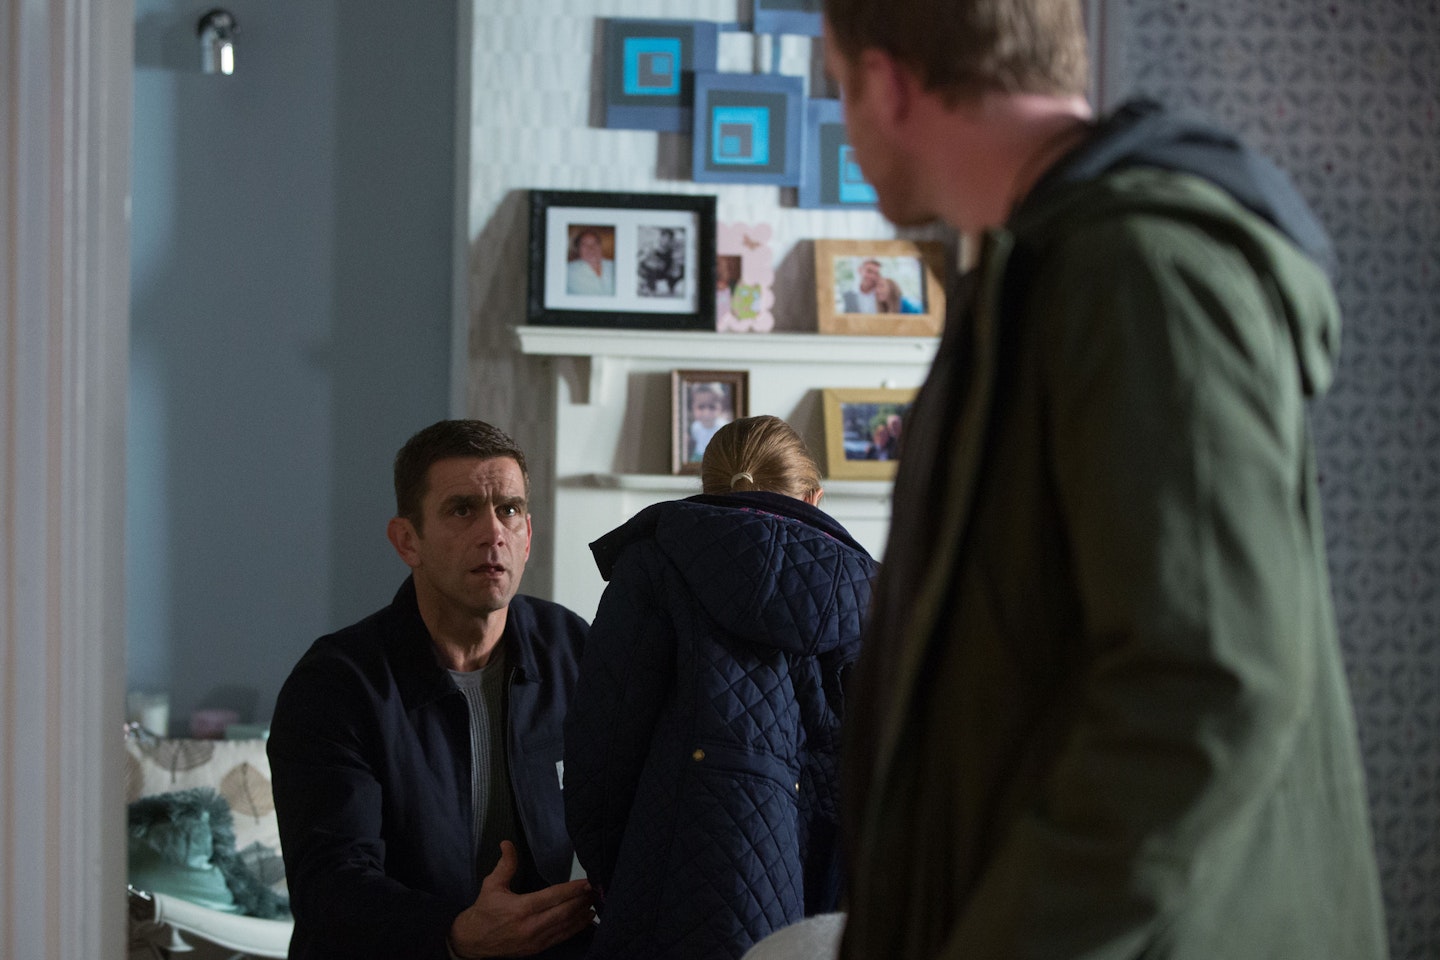 eastenders spoilers sean slater returns to the square